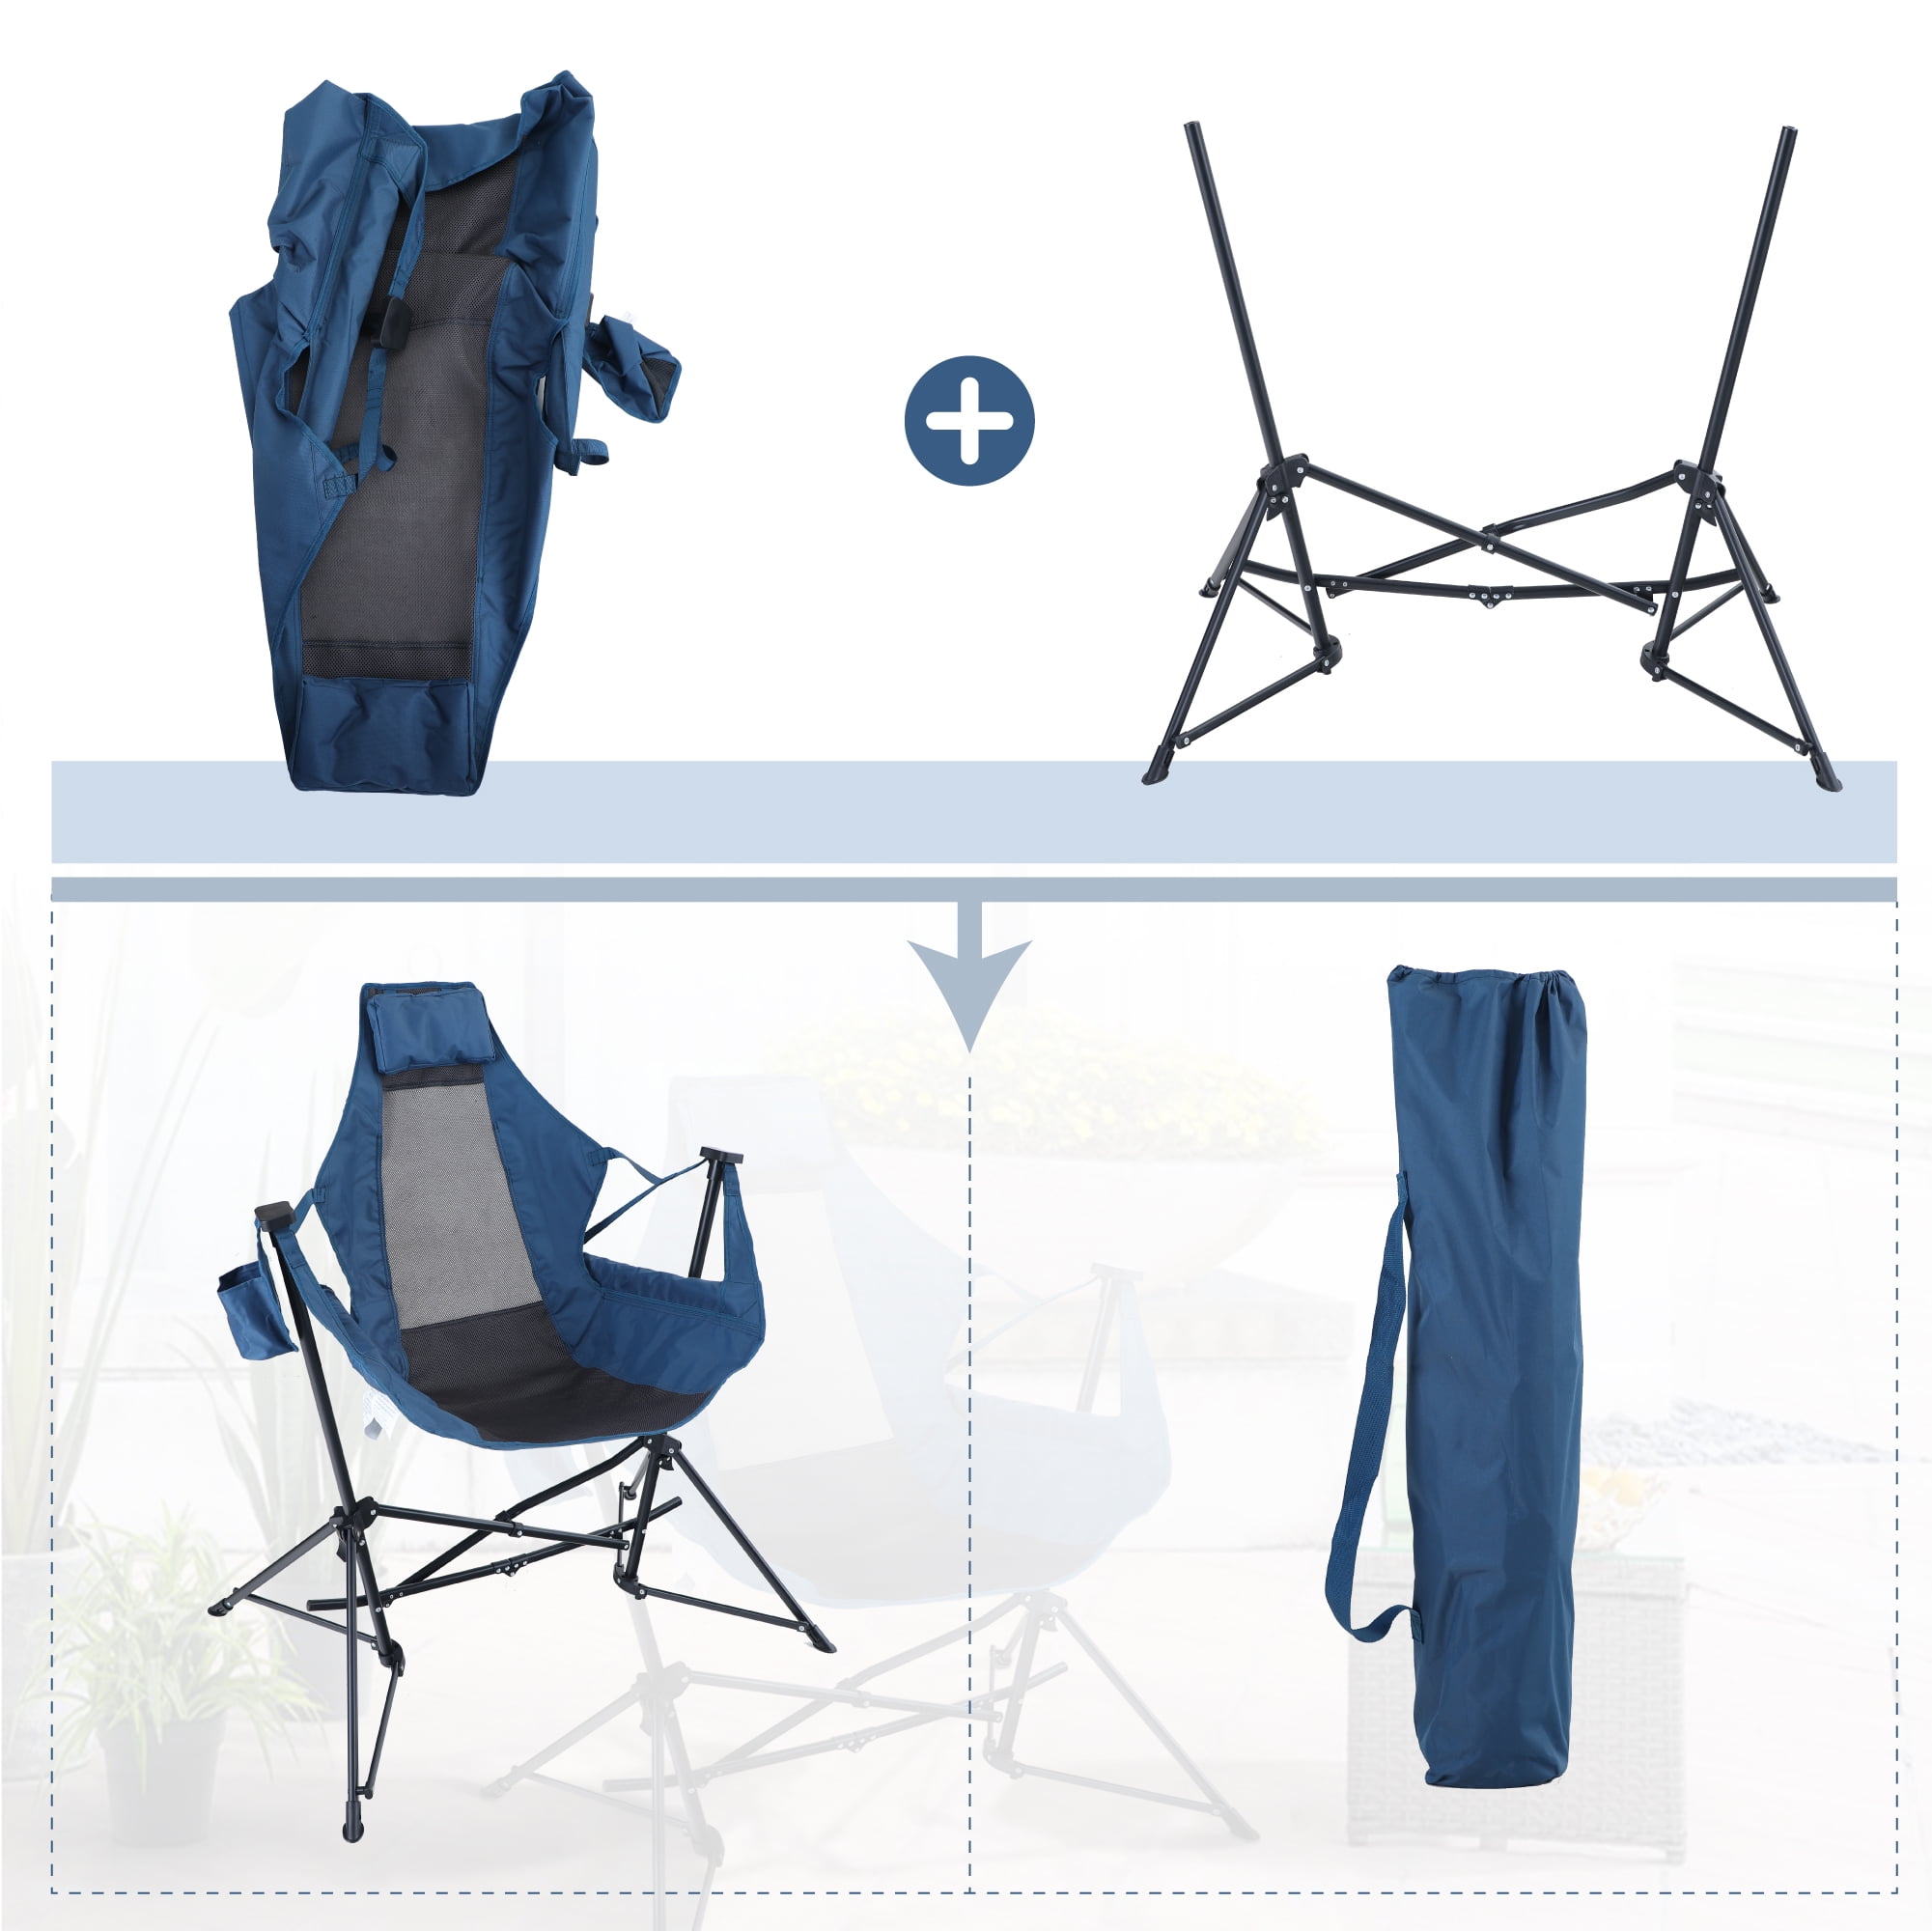 Gymax 2pcs Hammock Camping Chair w/ Retractable Footrest & Carrying - Blue